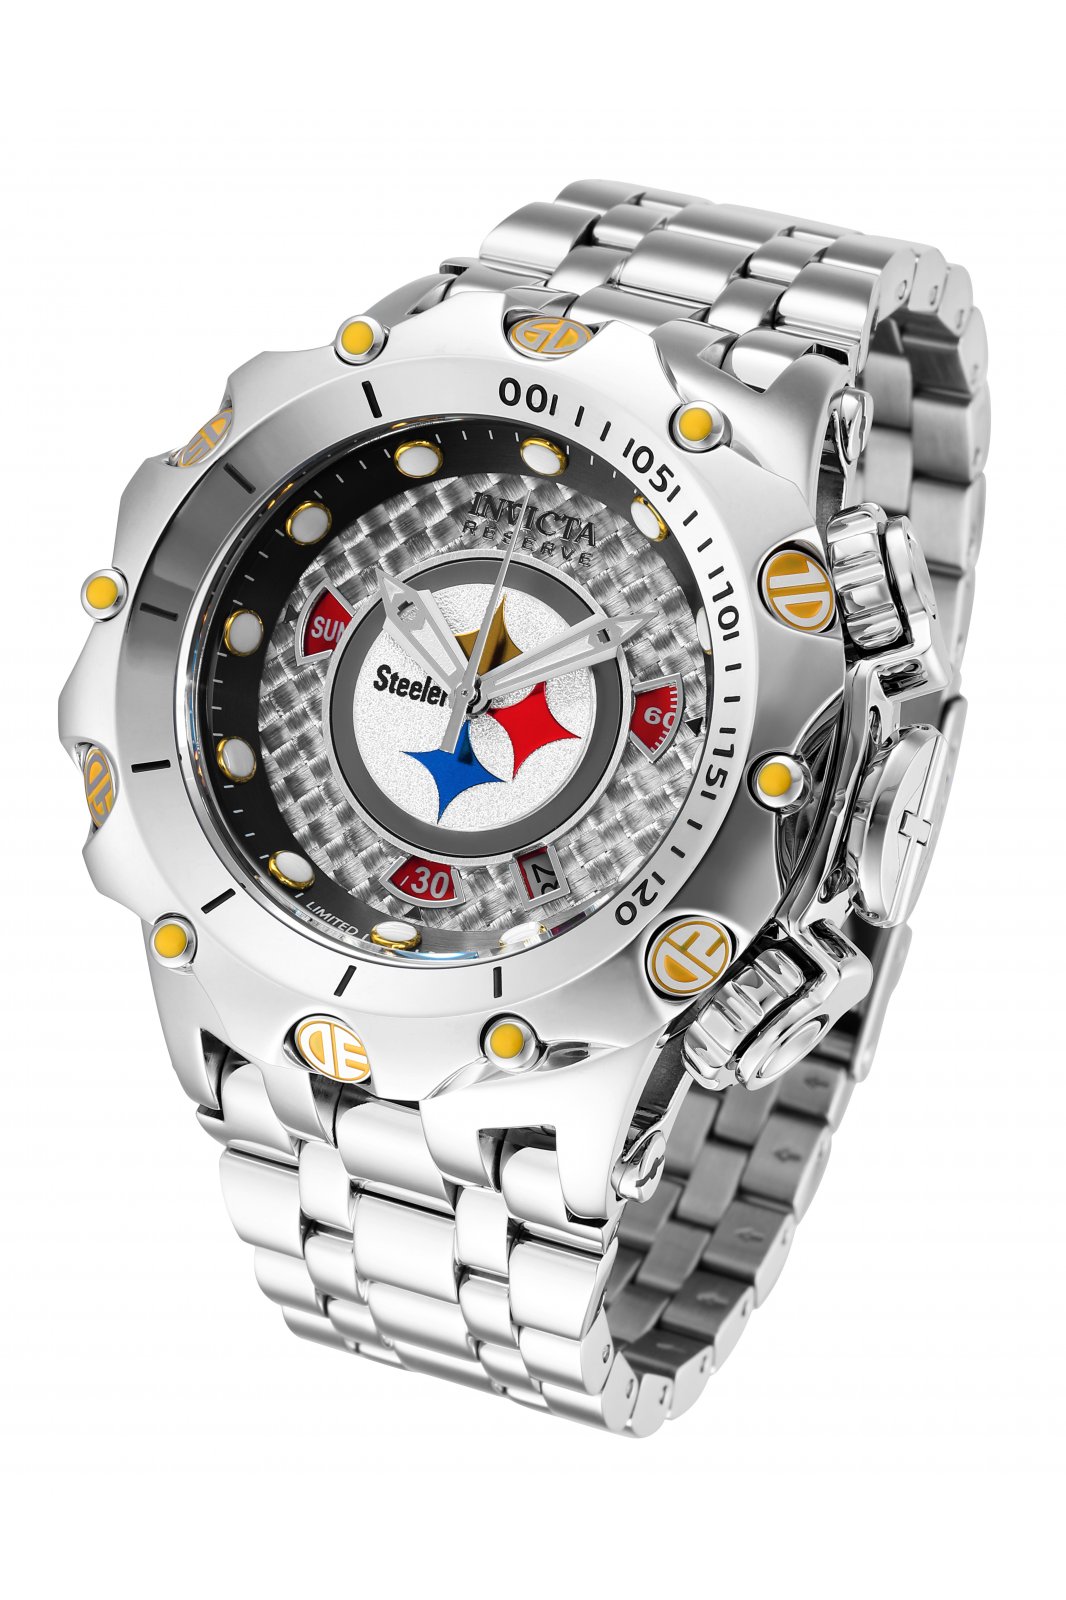 Invicta Watch NFL - Pittsburgh Steelers 41433 - Official Invicta